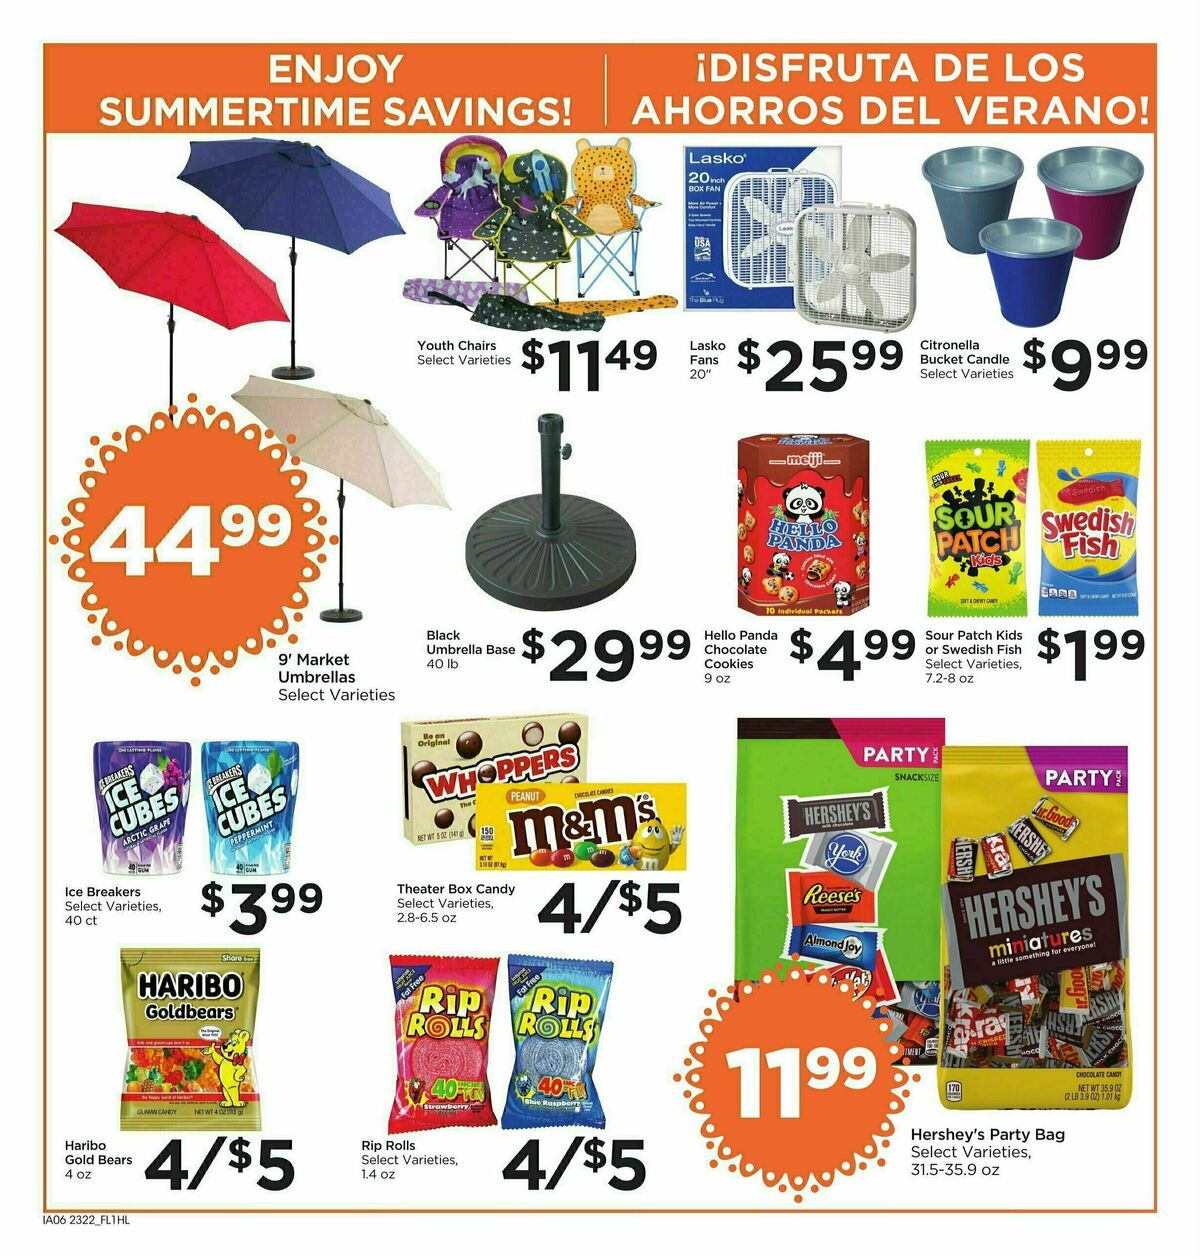 Food 4 Less Weekly Ad from June 28